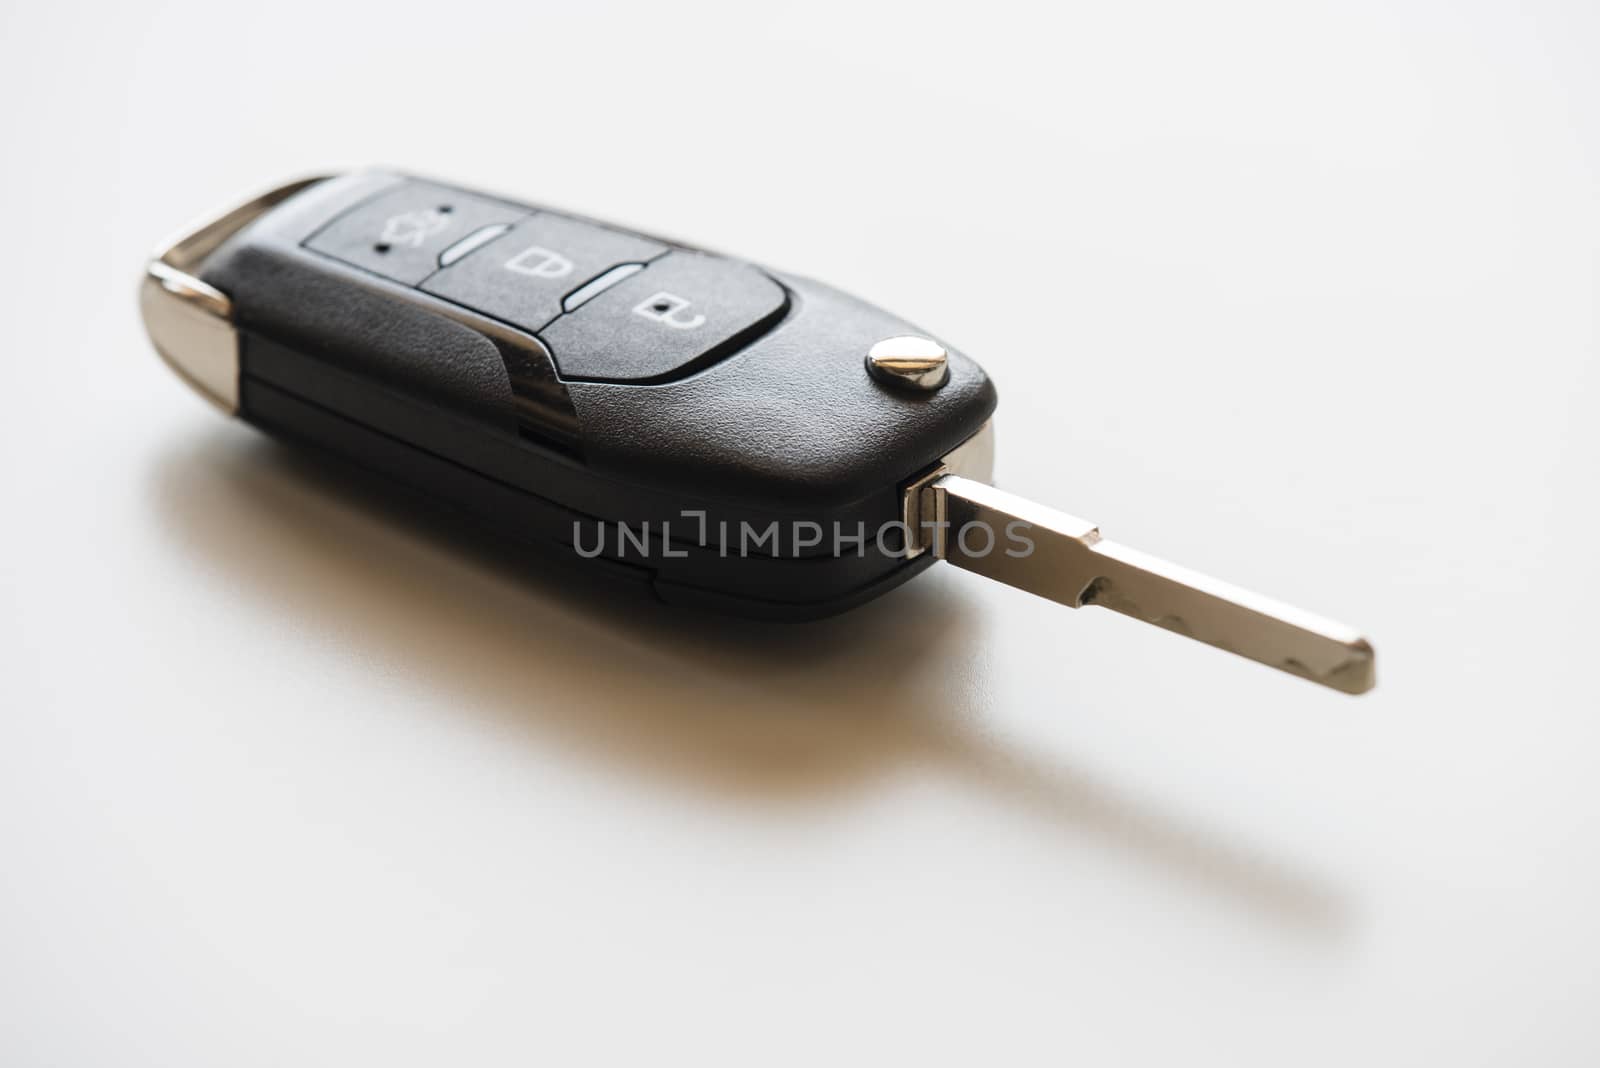 Remote electronic car key by AlessandroZocc